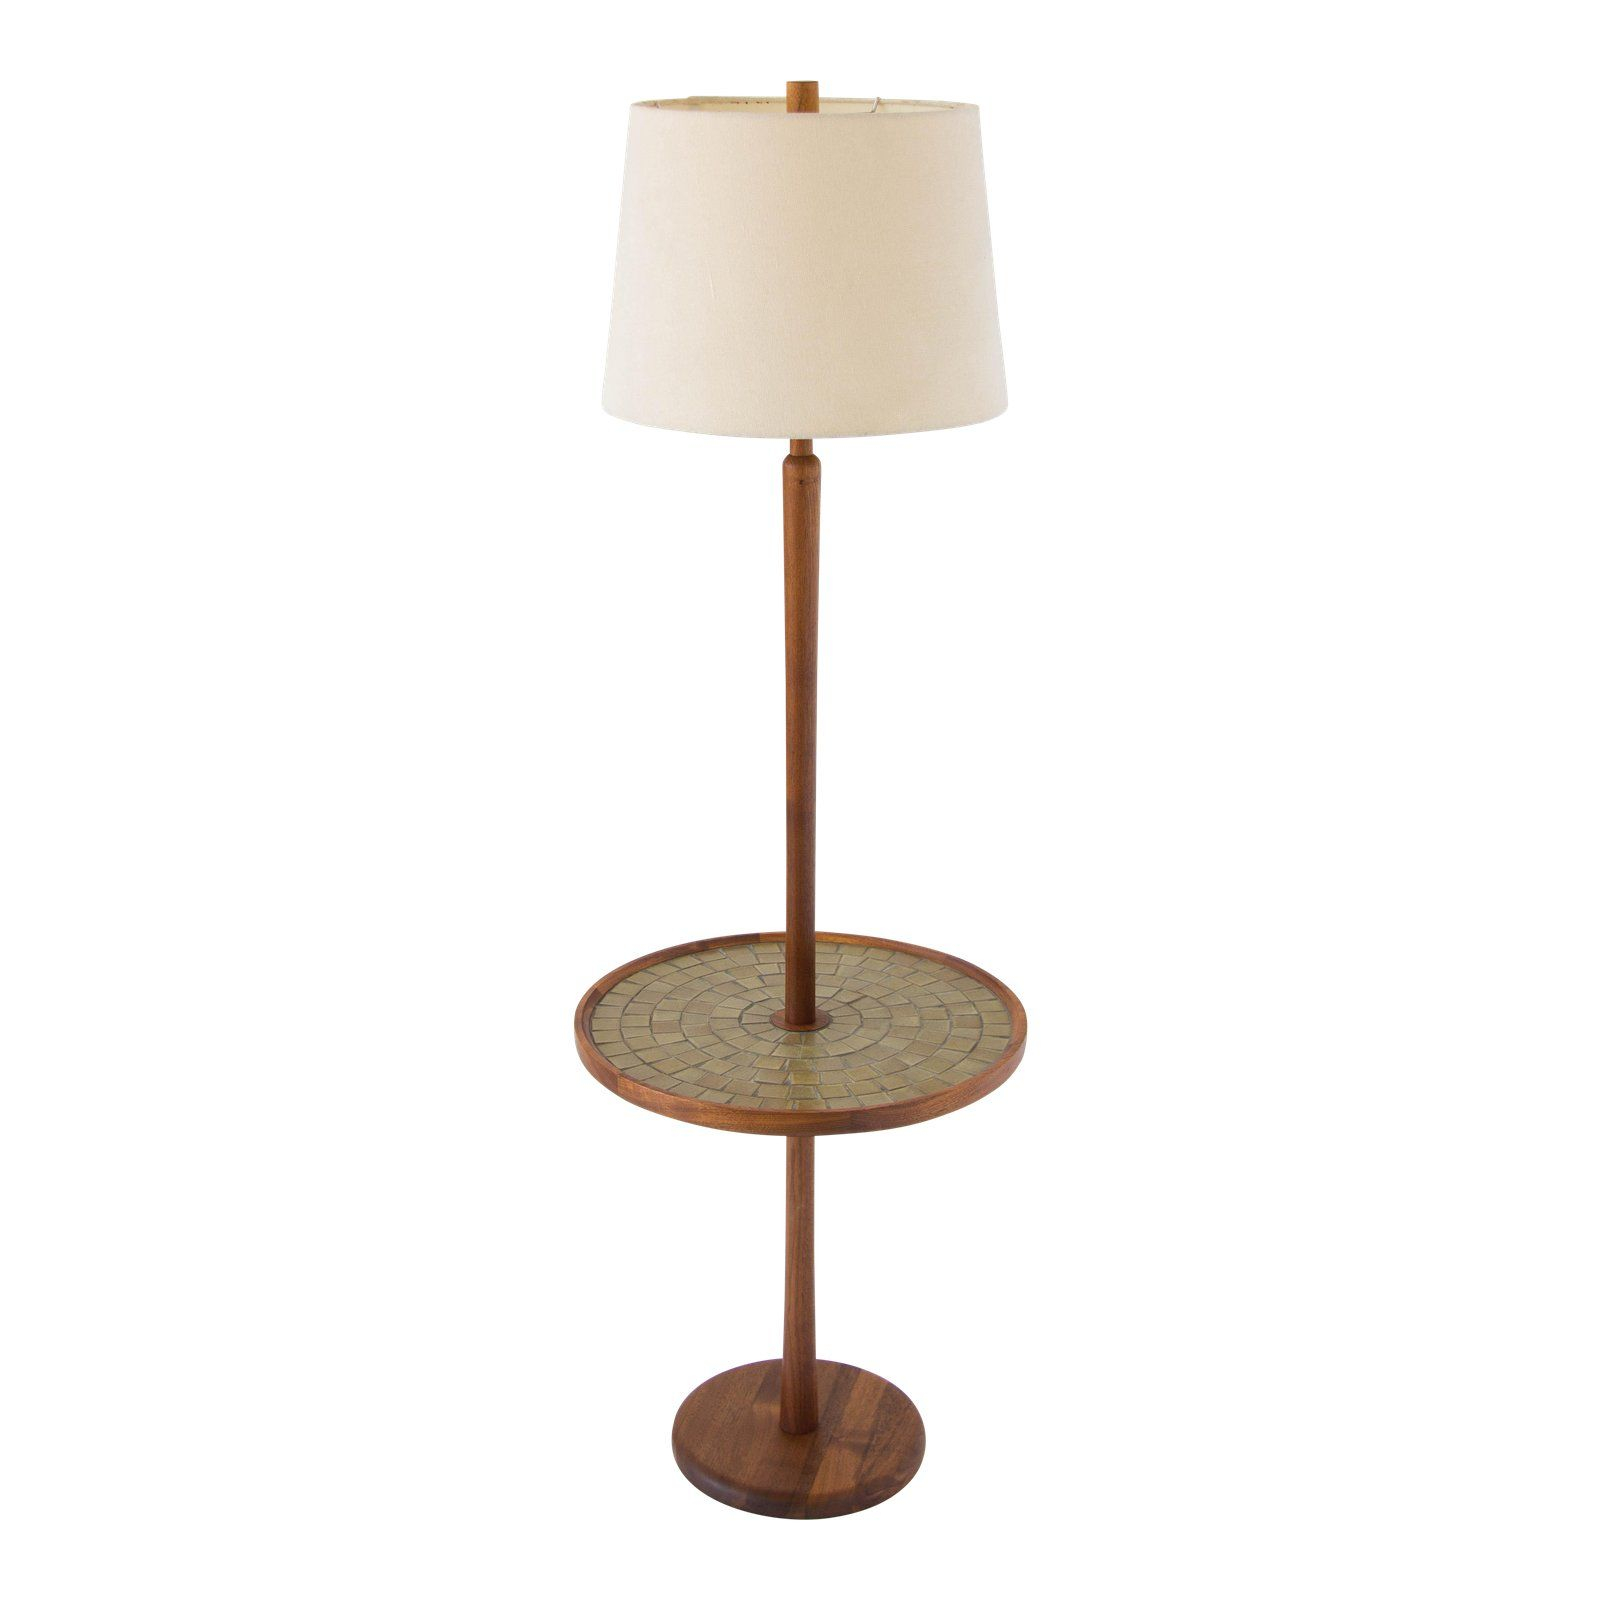 Gordon Jane Martz Floor Lamp With Tiled Table Maui in sizing 1600 X 1600